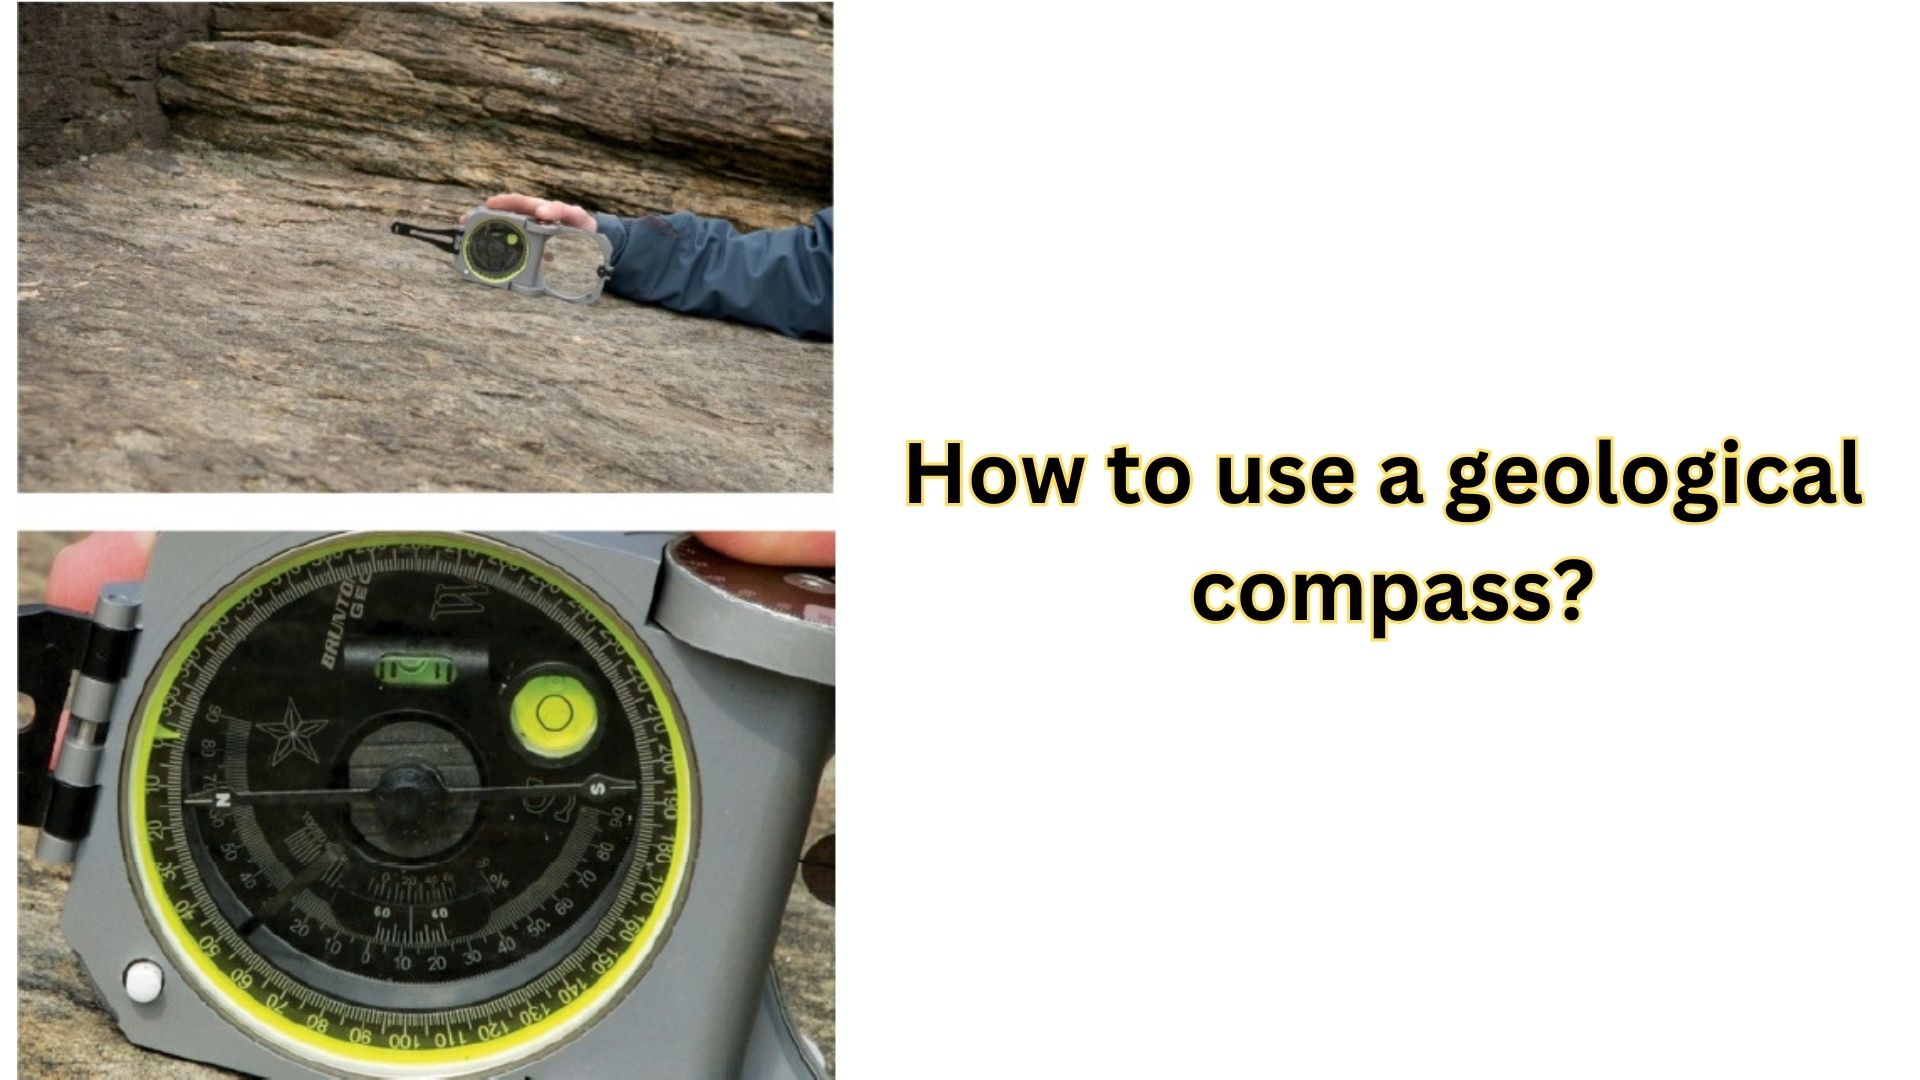 How to use a geological compass